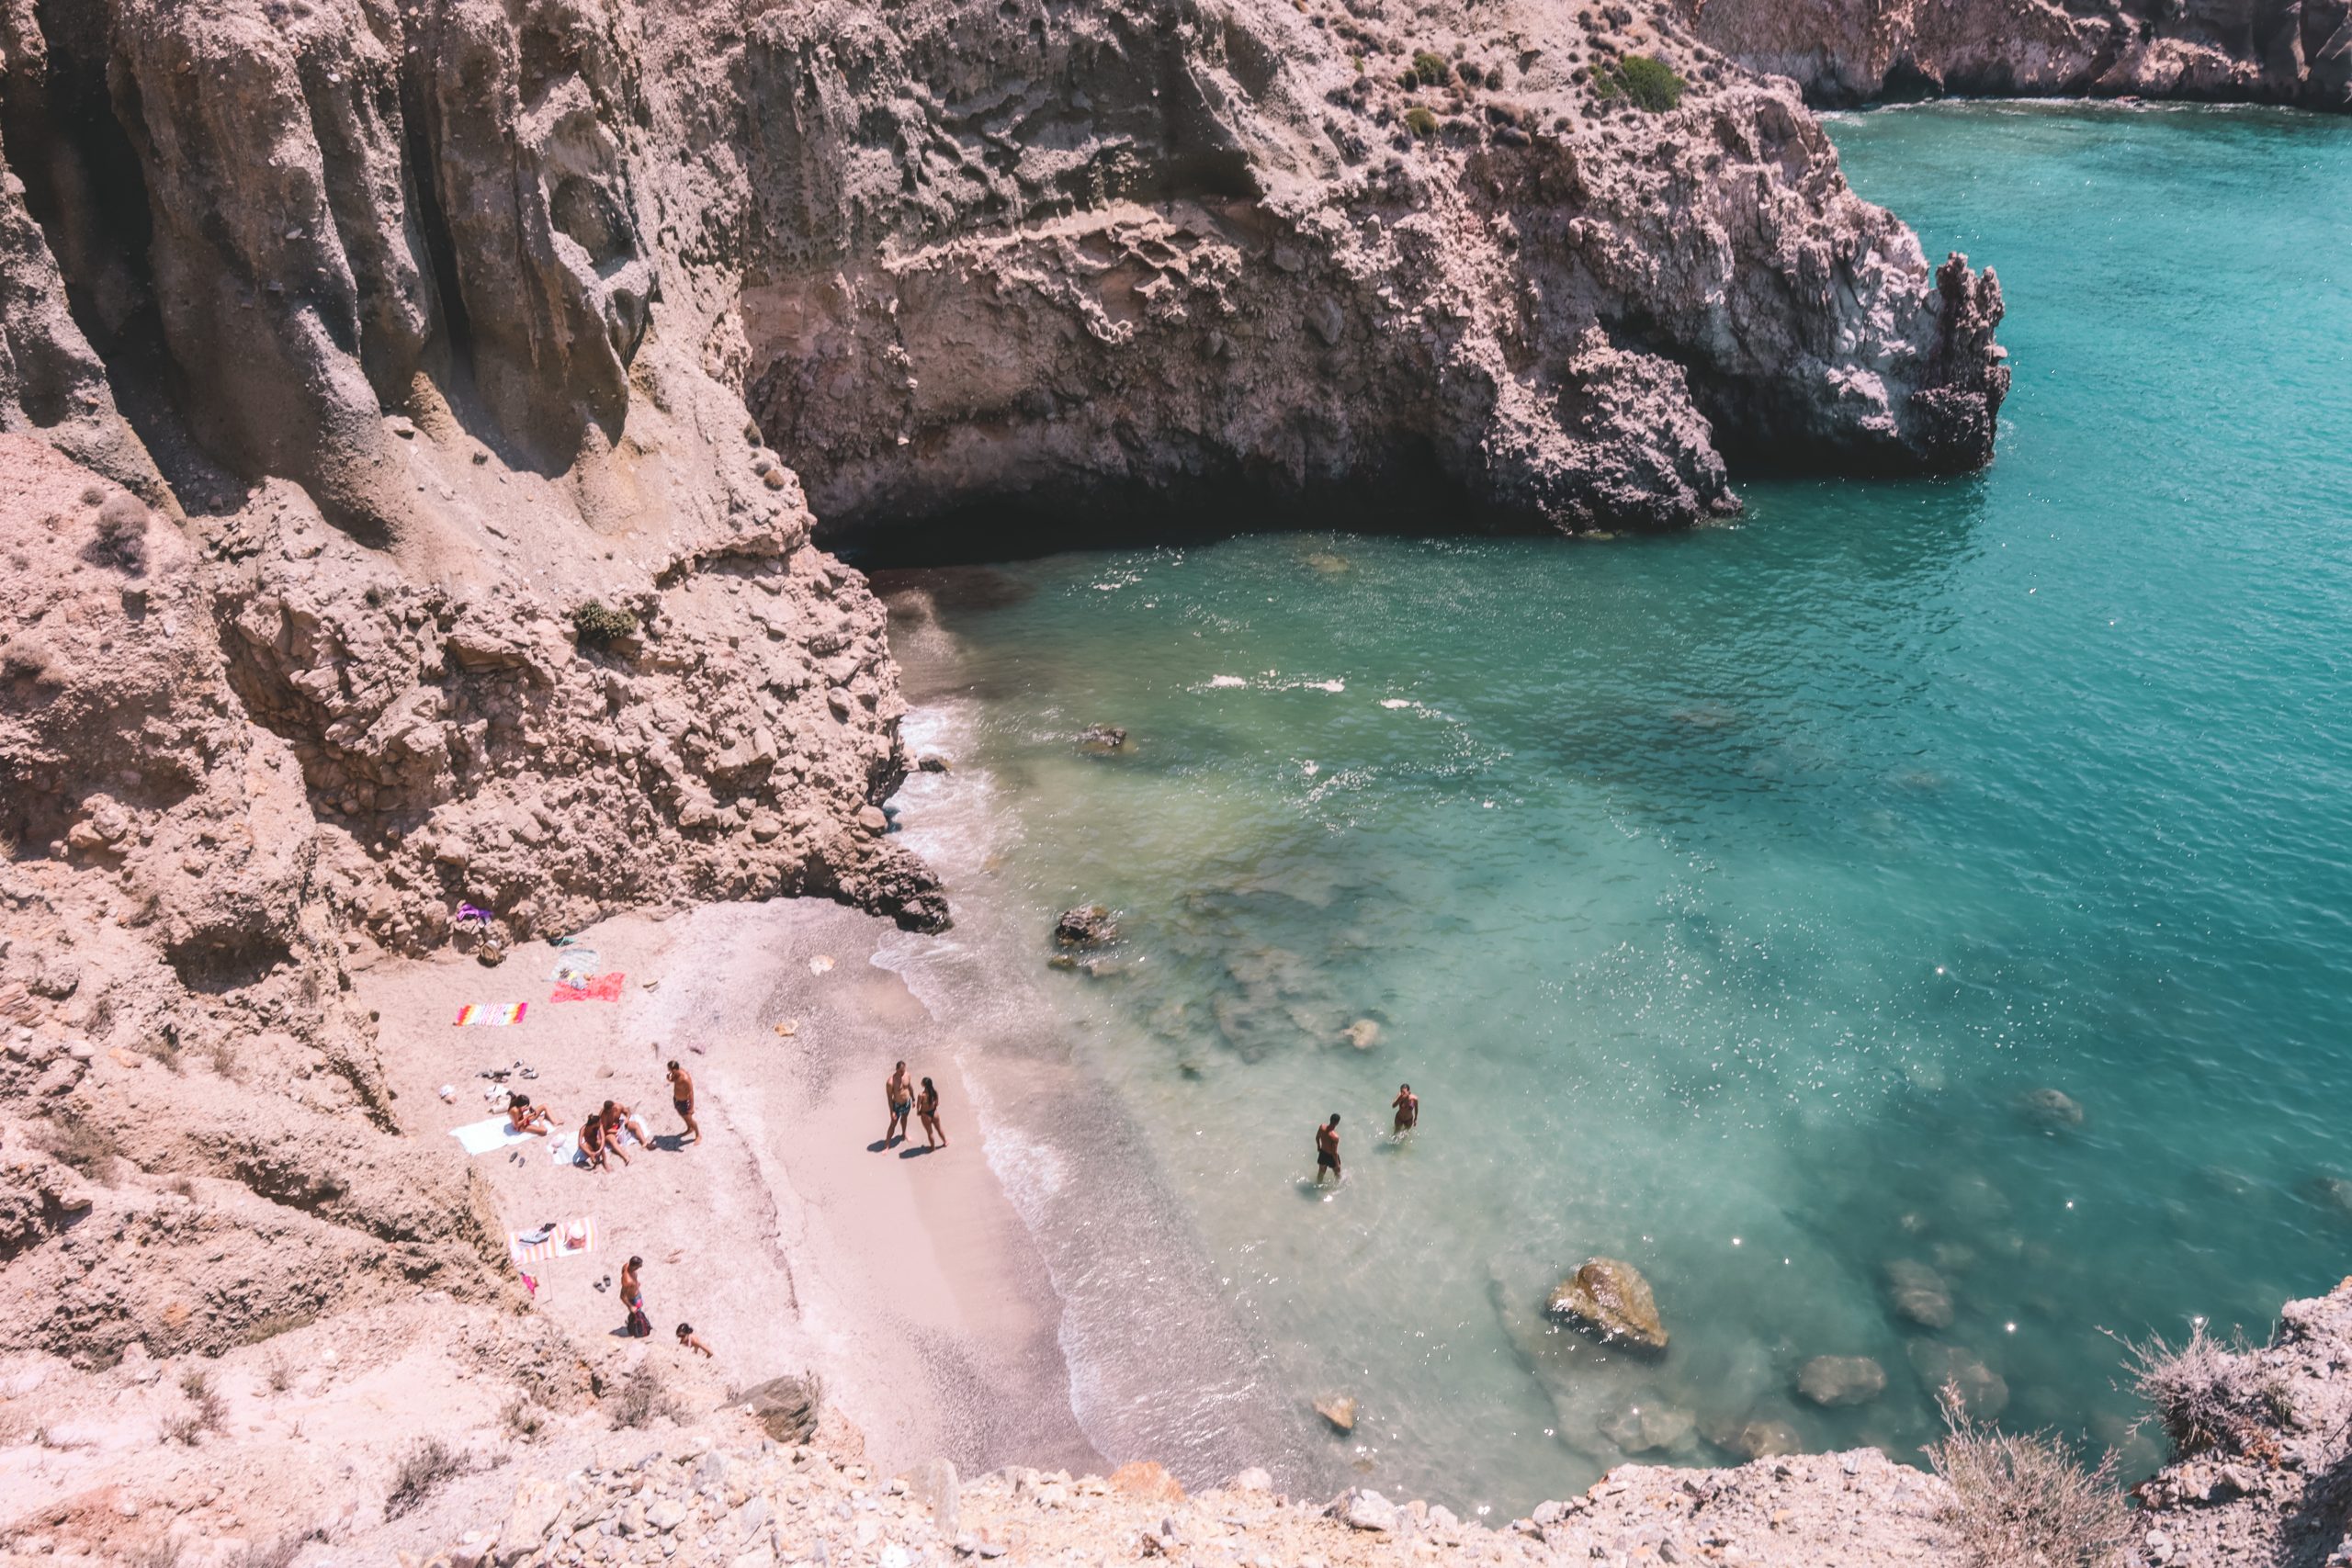 Tsigrado beach with people bathing and the turquoise sea nearby. Best beaches in Milos